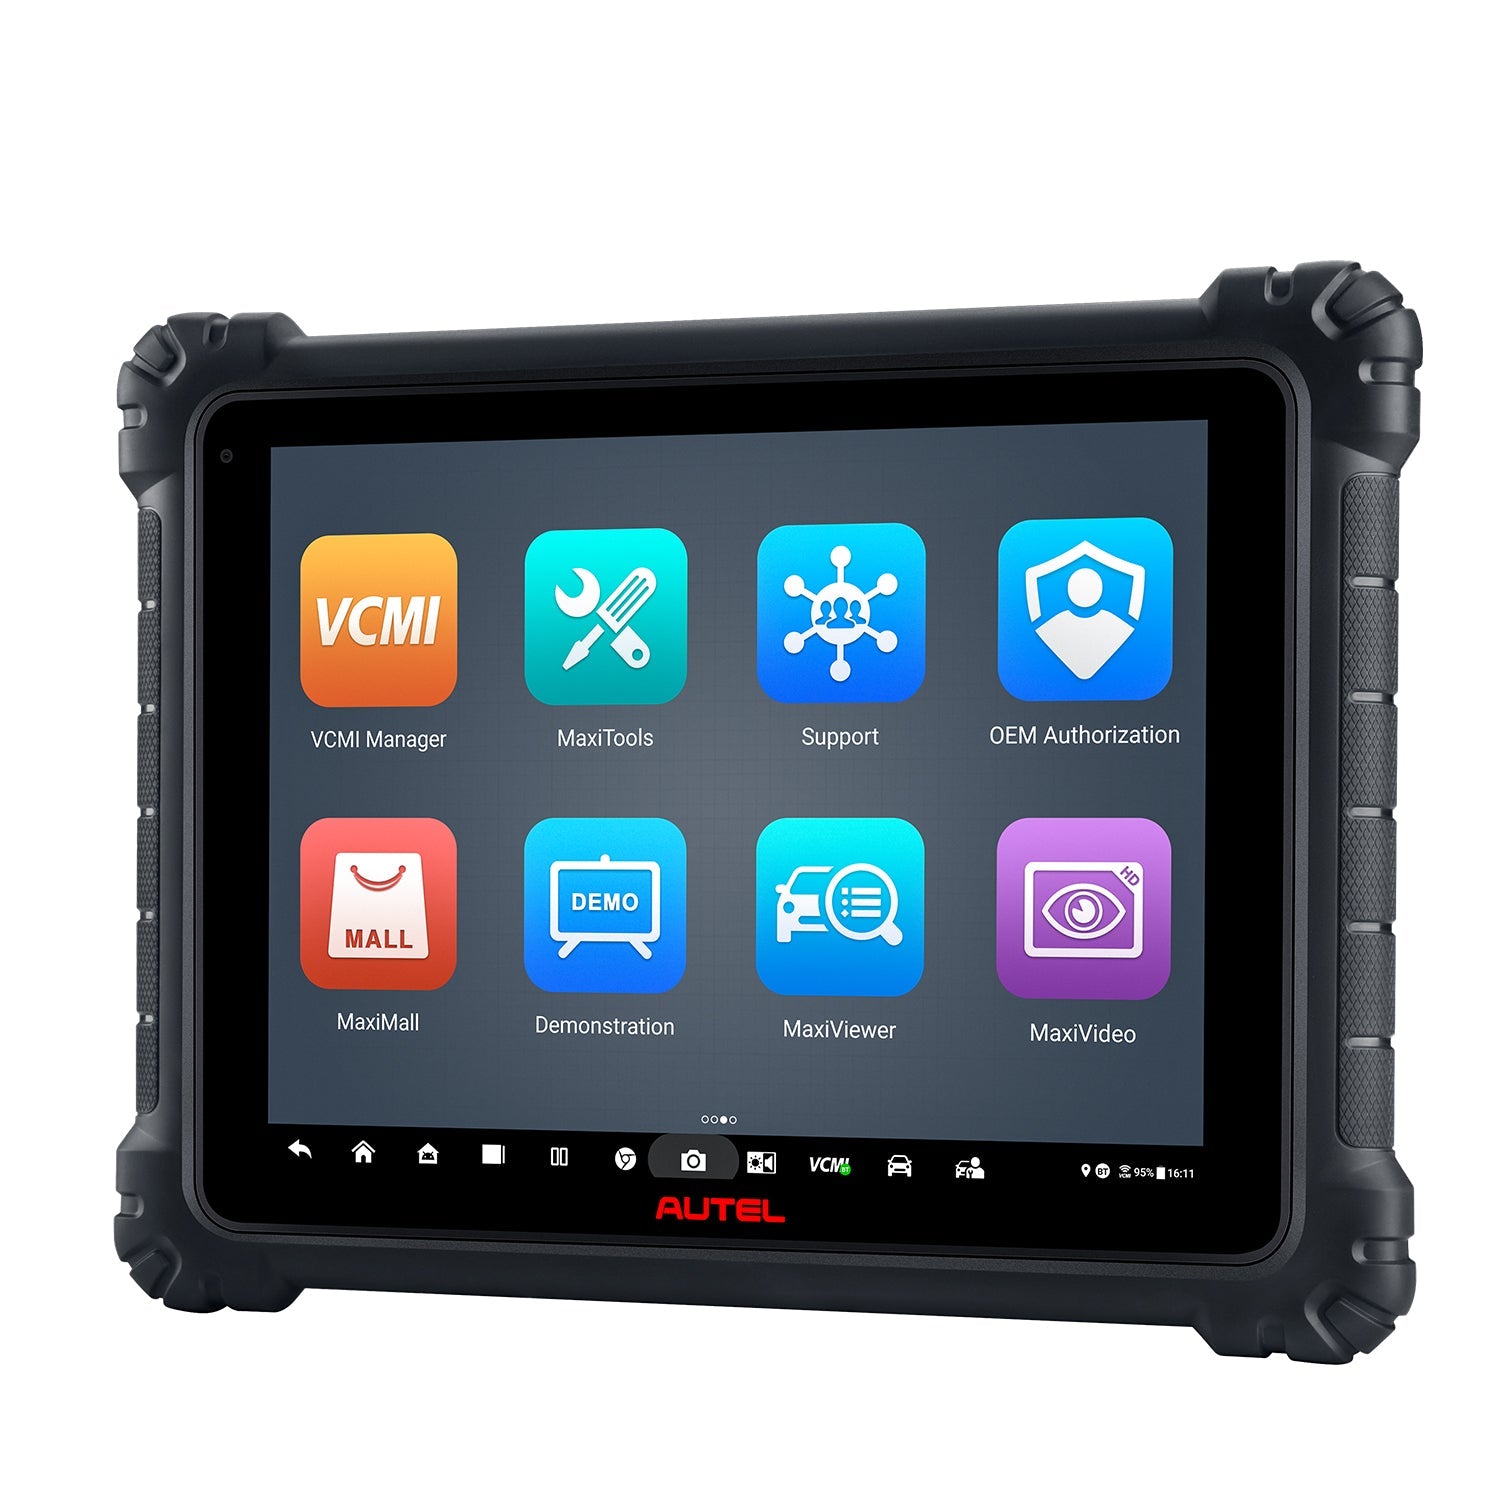 Autel MaxiSys Ultra 2023 Top Intelligent Diagnostic Scanner With 5-in-1 VCMI